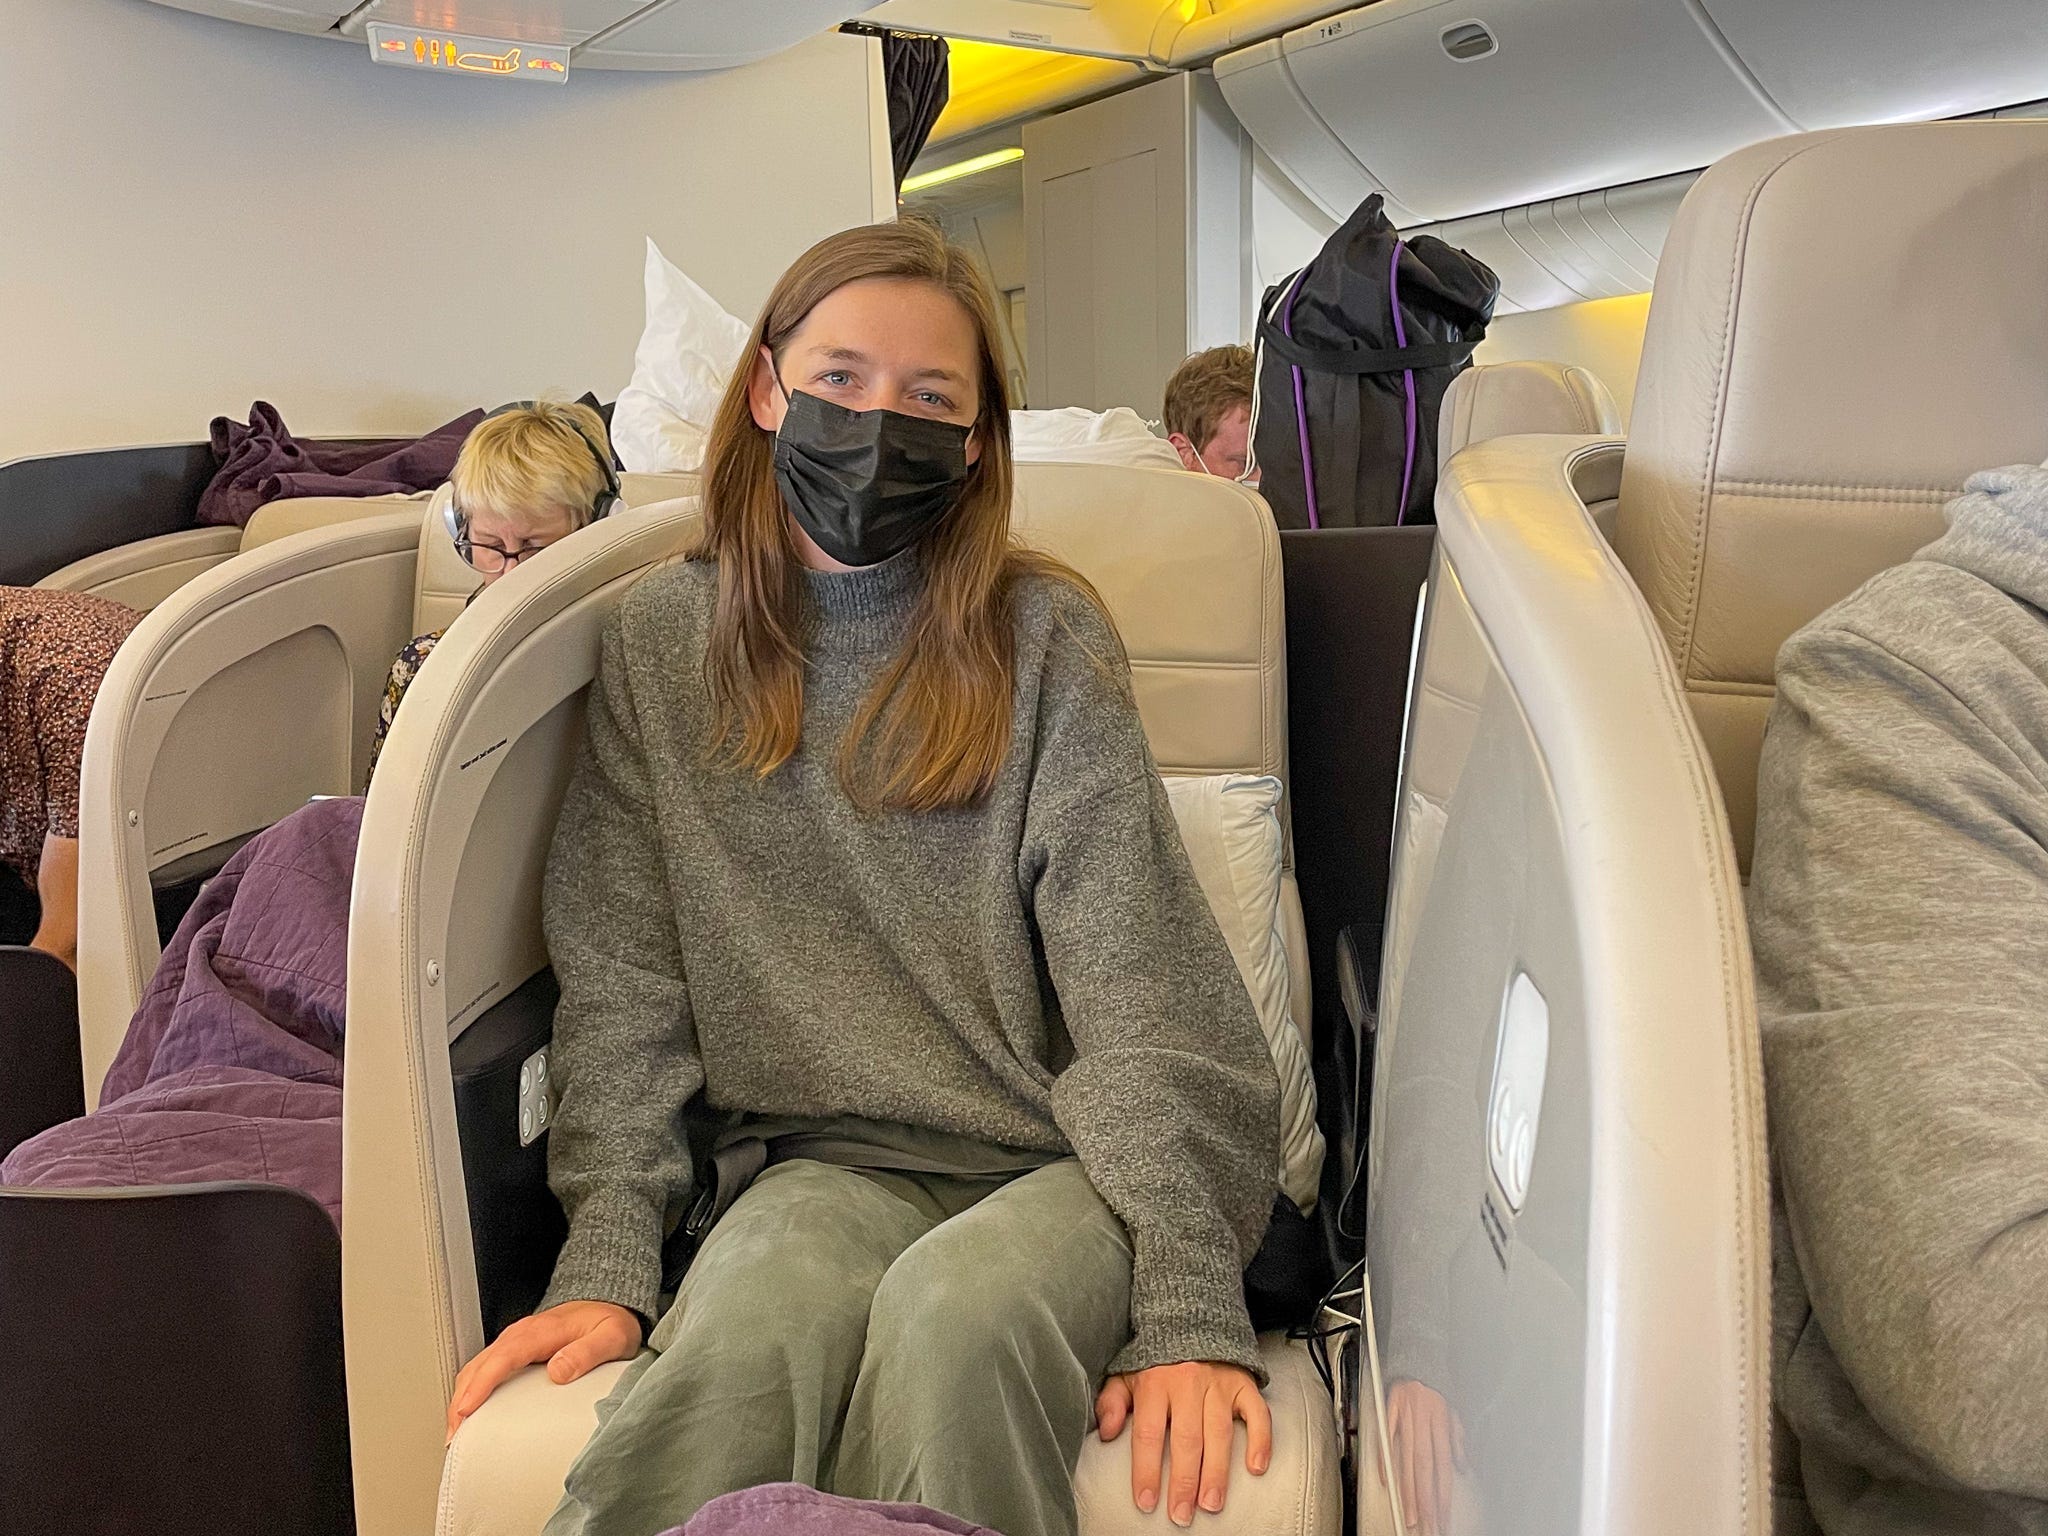 <ul class="summary-list"> <li>I took a 12-hour, business-class flight from Los Angles to Auckland, New Zealand.</li> <li>Air New Zealand's business-class seats on this route typically cost about $6,000.</li> <li>It was the most luxurious flight of my life but I can't justify ever paying that much in the future.</li> </ul><div class="read-original">Read the original article on <a href="https://www.insider.com/business-class-long-haul-flights-not-worth-cost-2023-3">Insider</a></div>